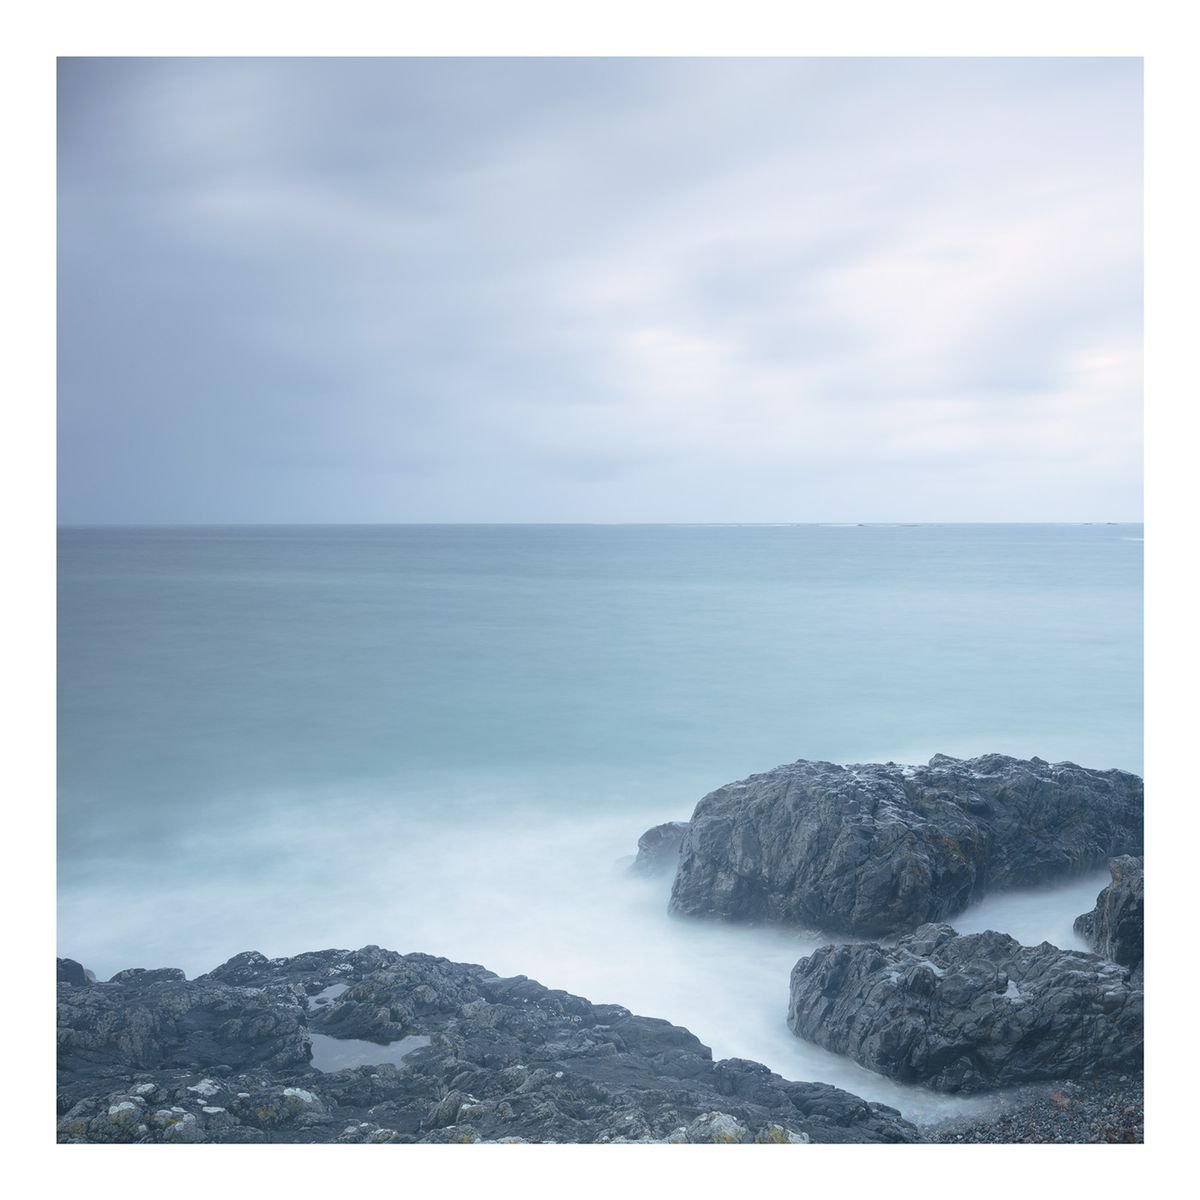 Tiree Forms by David Baker